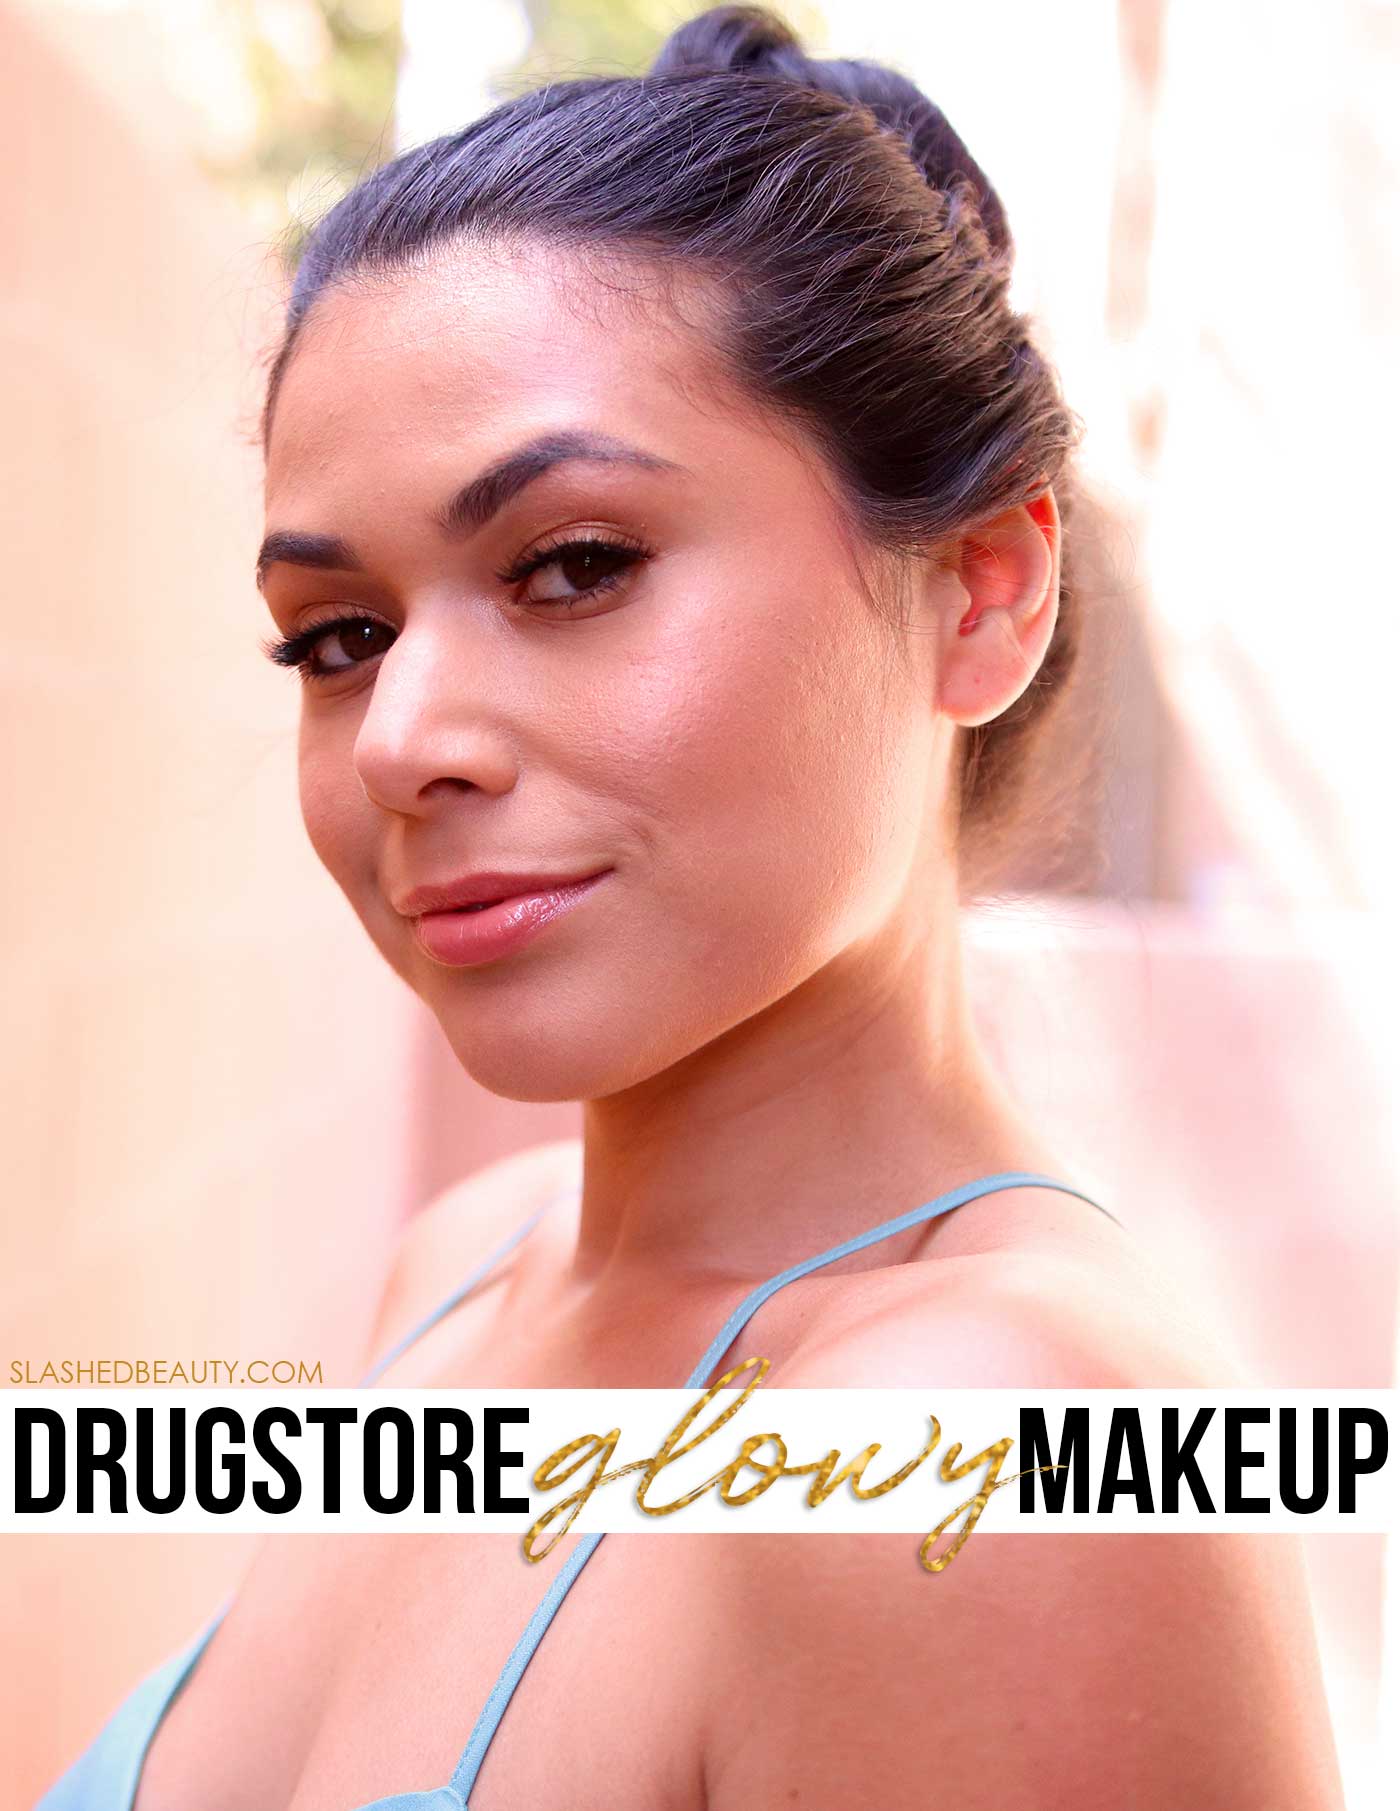 5 Best Glowy Makeup Products from the Drugstore